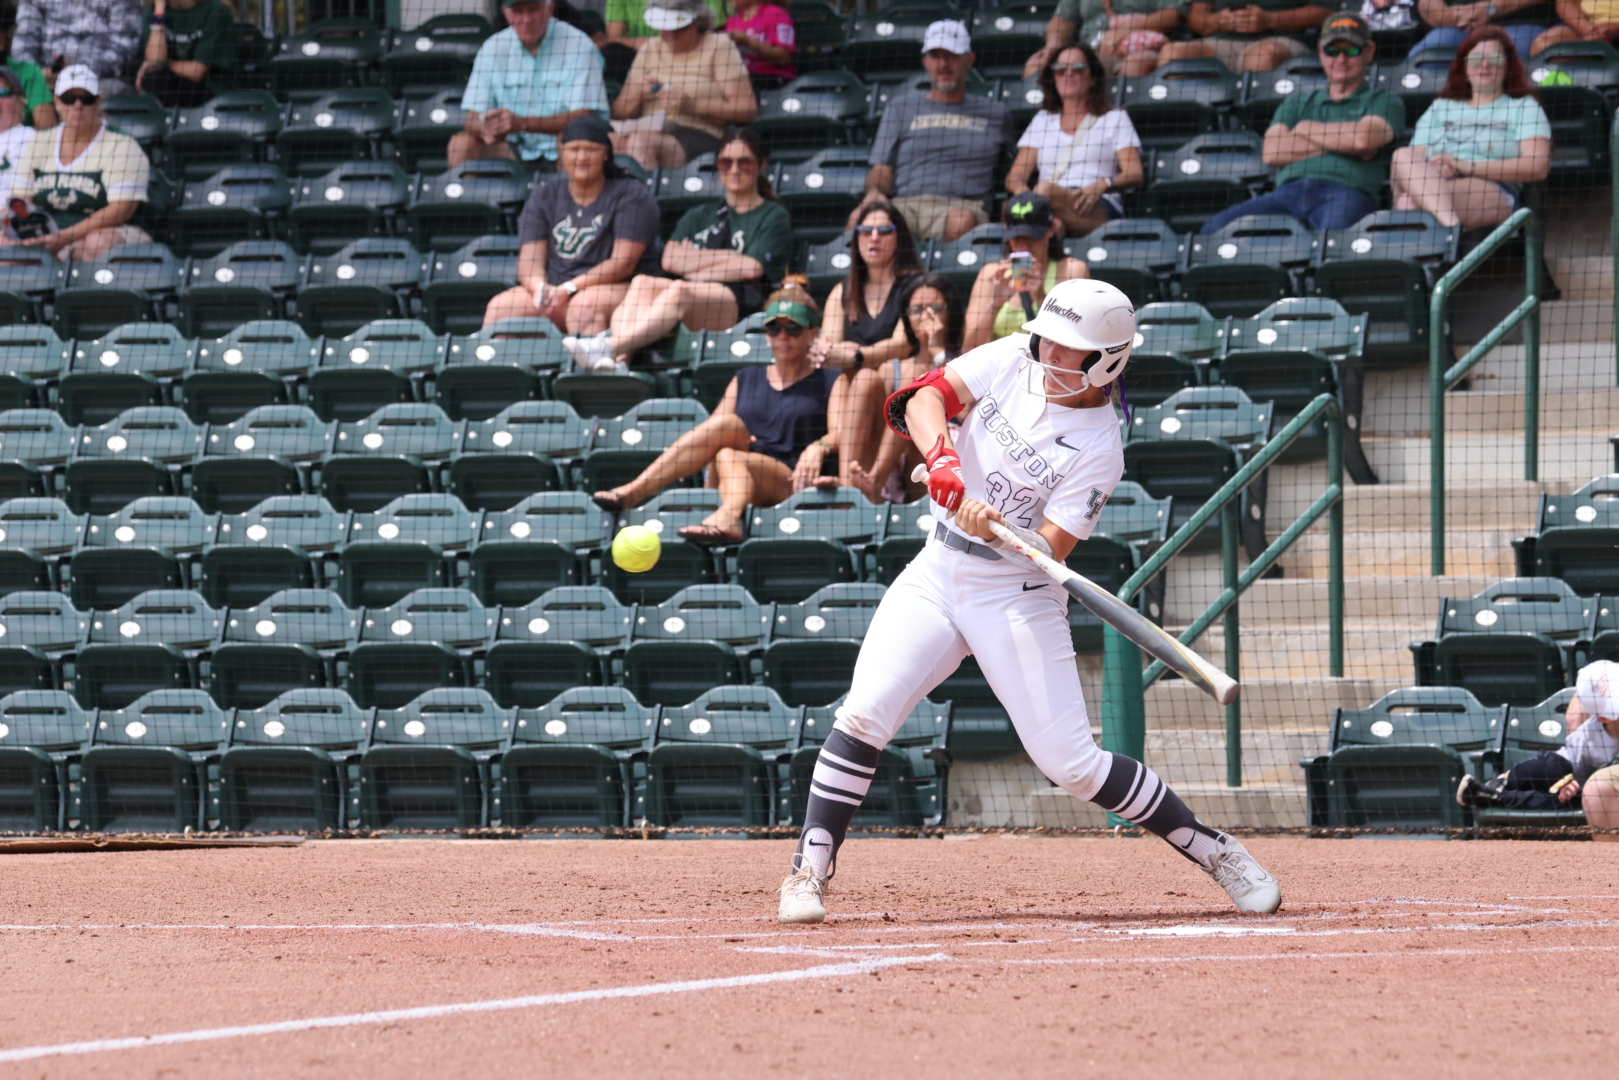 UH softball's Bethany Busch was rersponsible for both of the Cougars' runs on Friday with a two-run shot to right-center in the top of the sixth. | Courtesy of UH athletics